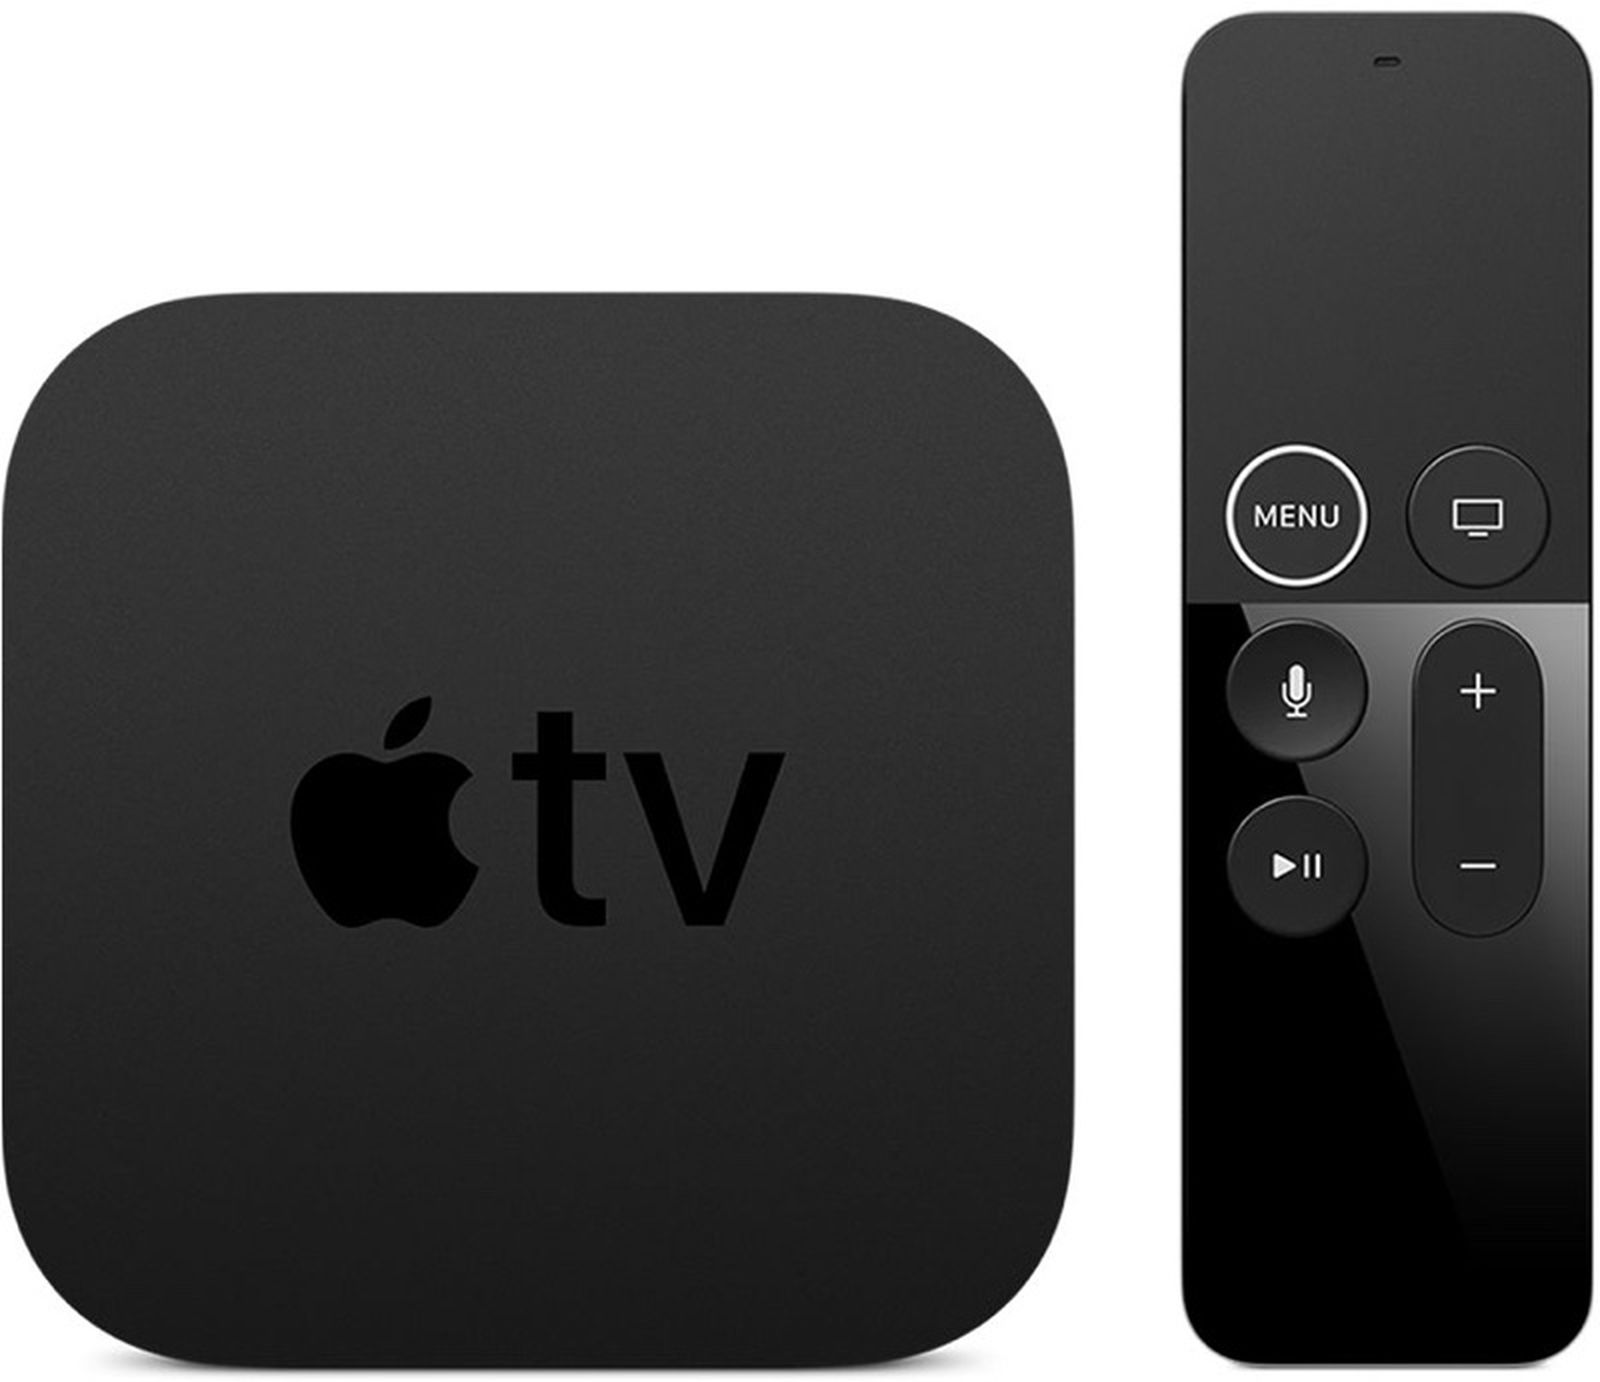 Hollow Slået lastbil Sømand Apple Seeds First Beta of tvOS 13.3.1 Update to Developers [Update: Public  Beta Available] - MacRumors